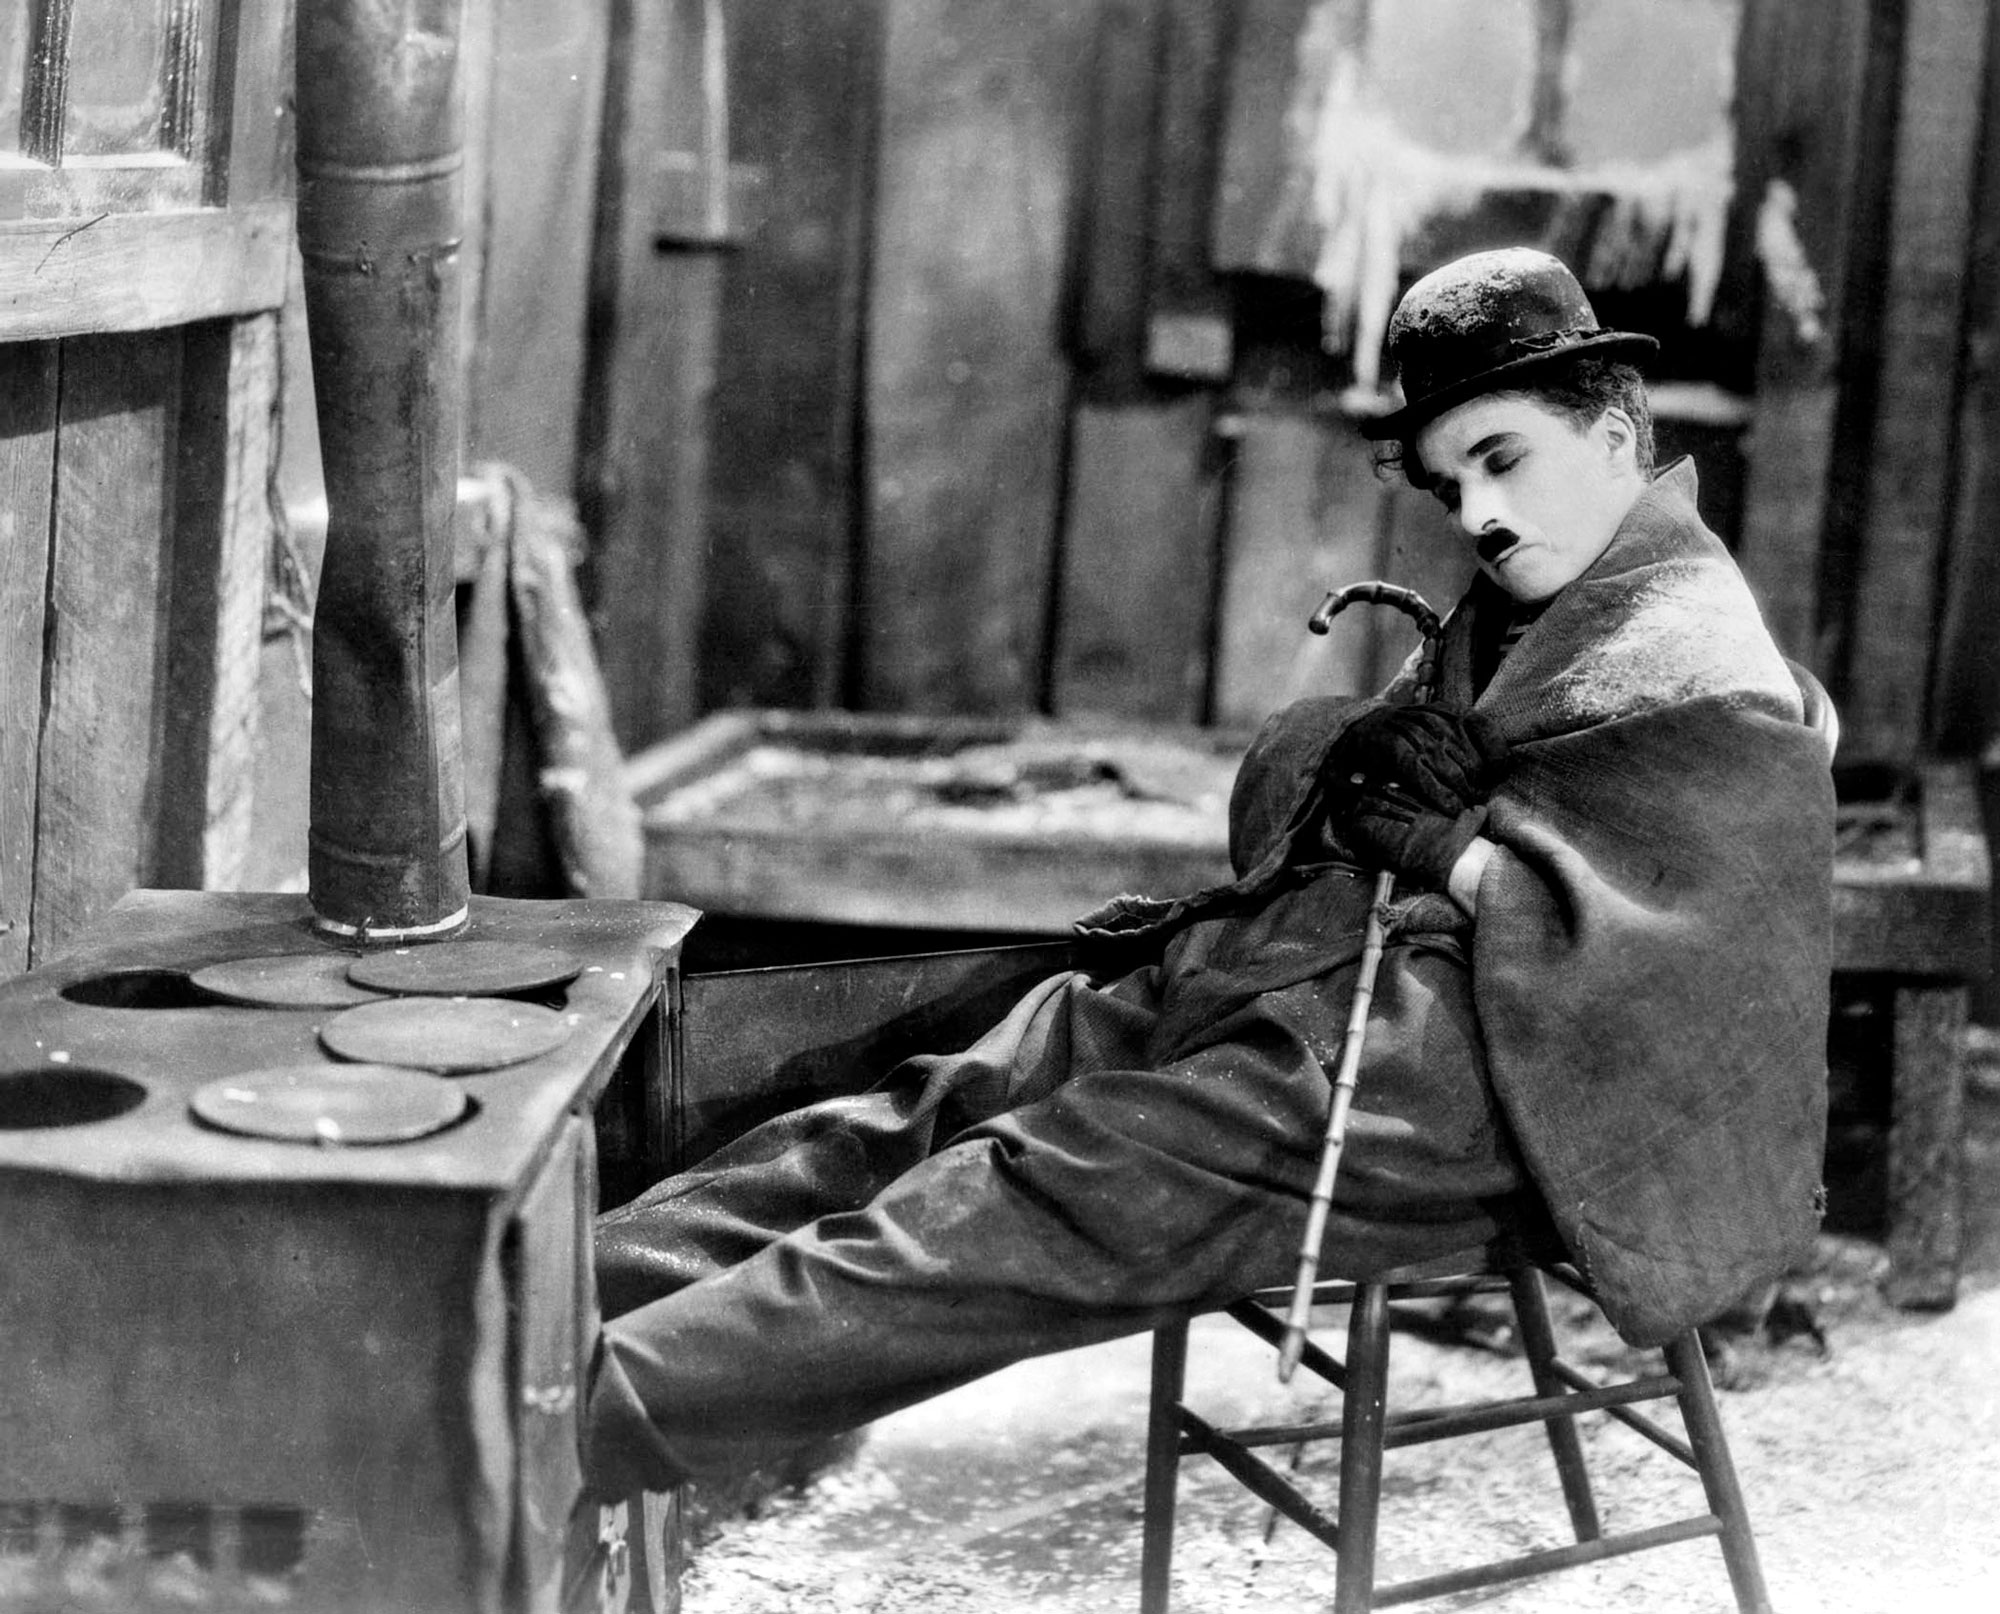 7 Art Cinema | Charlie Chaplin | The Kid (1921), A Woman of Paris (1923), The Gold Rush (1925), The Circus (1928), City Lights (1931), Modern Times (1936), The Great Dictator (1940), Monsieur Verdoux (1947), Limelight (1952), A King in New York (1957), A Countess from Hong Kong (1967) | United Artists, Keystone Film Company, Essanay Film Manufacturing Compagny, Mutual | Bio, Trailers, Short Films, Feature Films | Director, Producer, Screenwriter, Actor, Composer | Charlie Chaplin 1889 - 1977 | Photograph